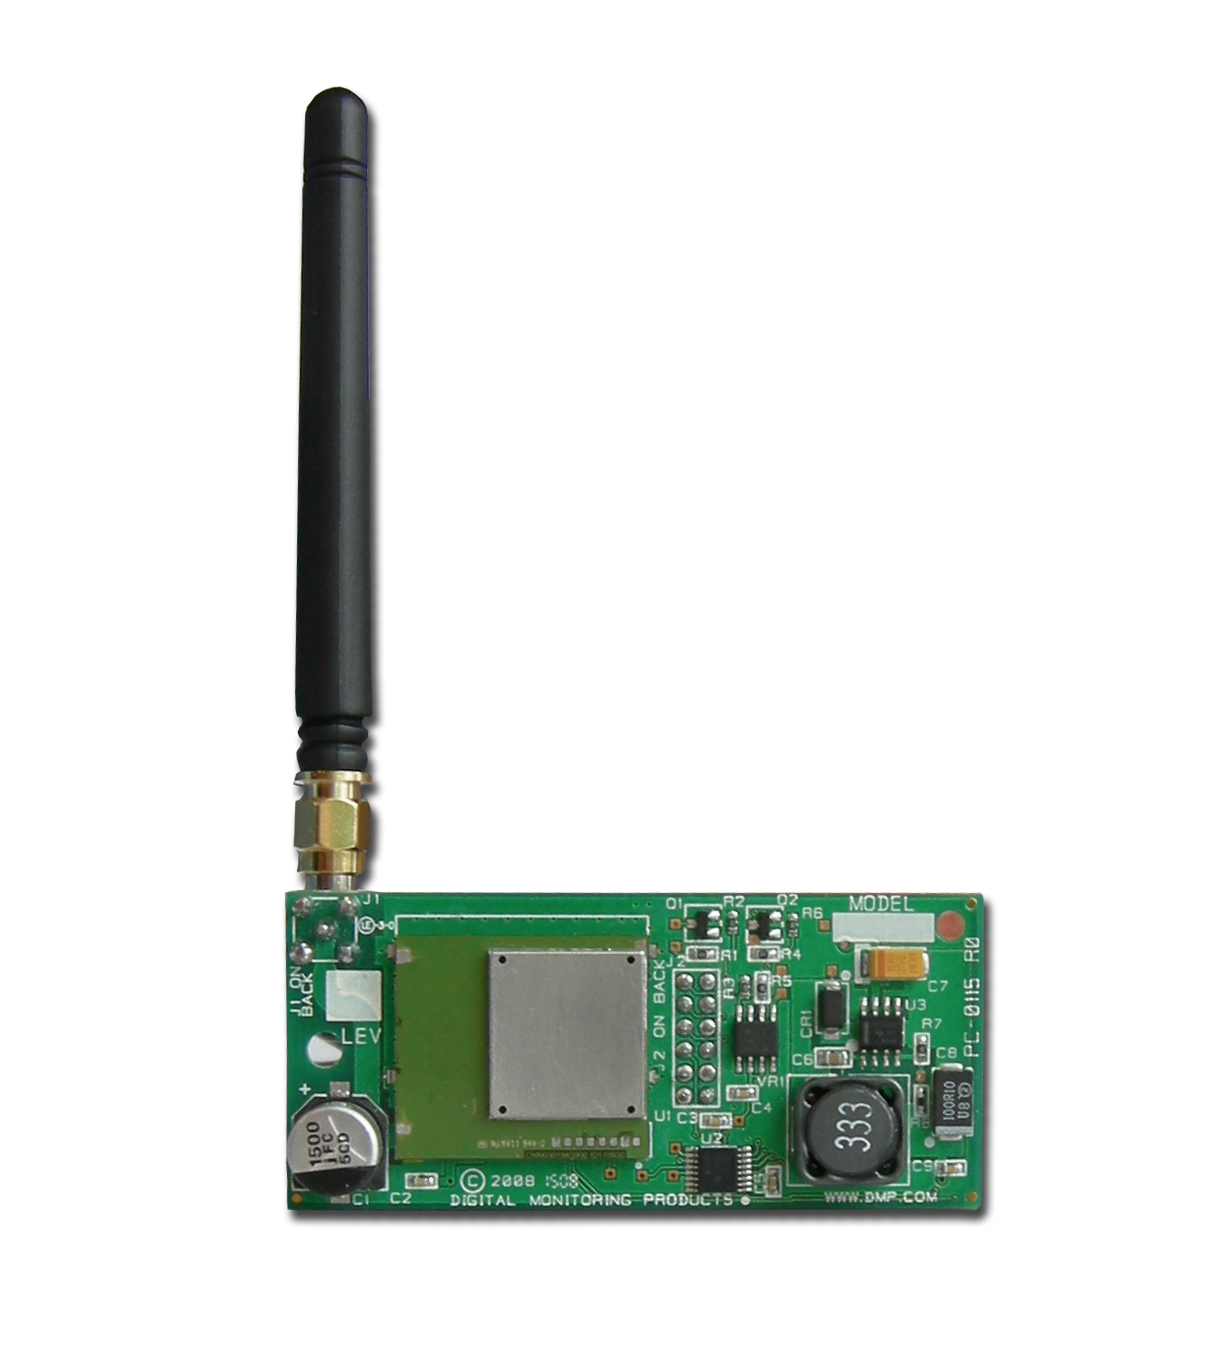 3G and 4G Cellular Communicators from DMP